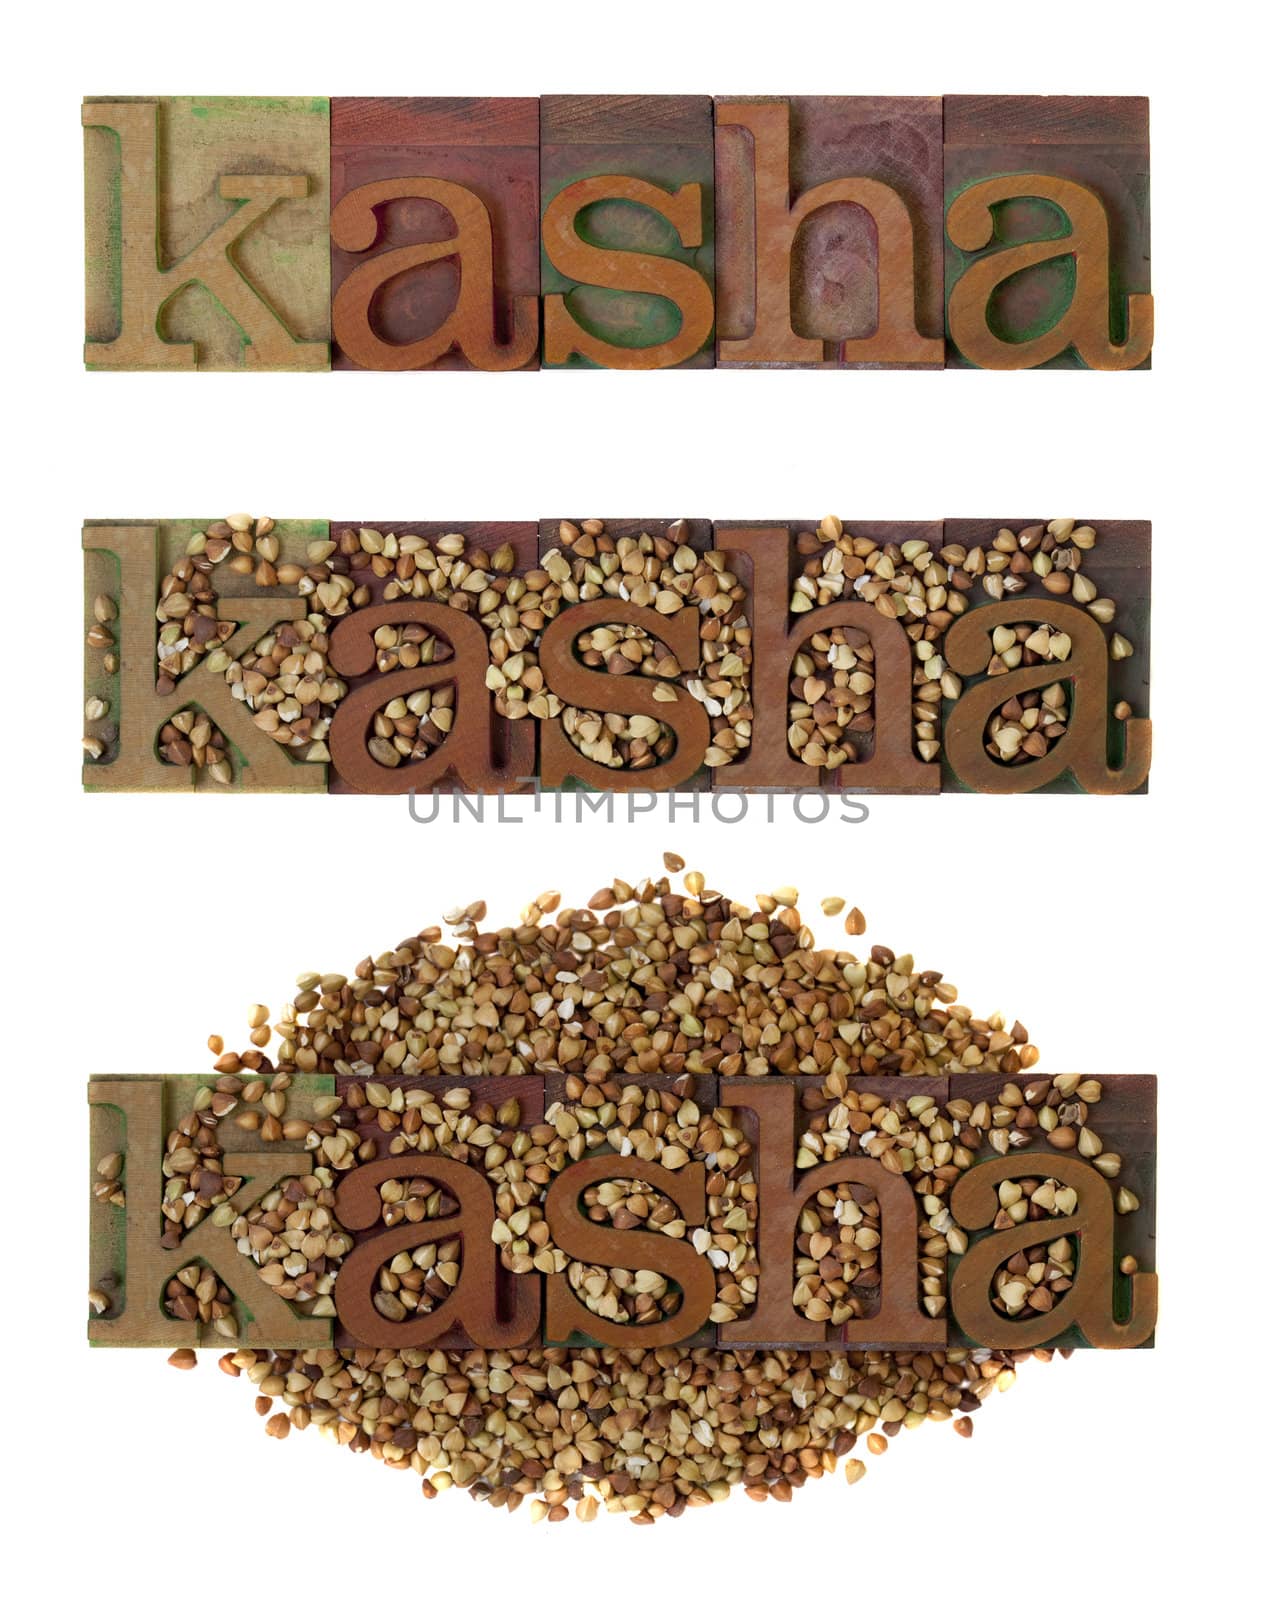 kasha word combined with roasted buckwheat grain, three layouts in vintage wooden letterpress type blocks, stained by color ink, isolated on white